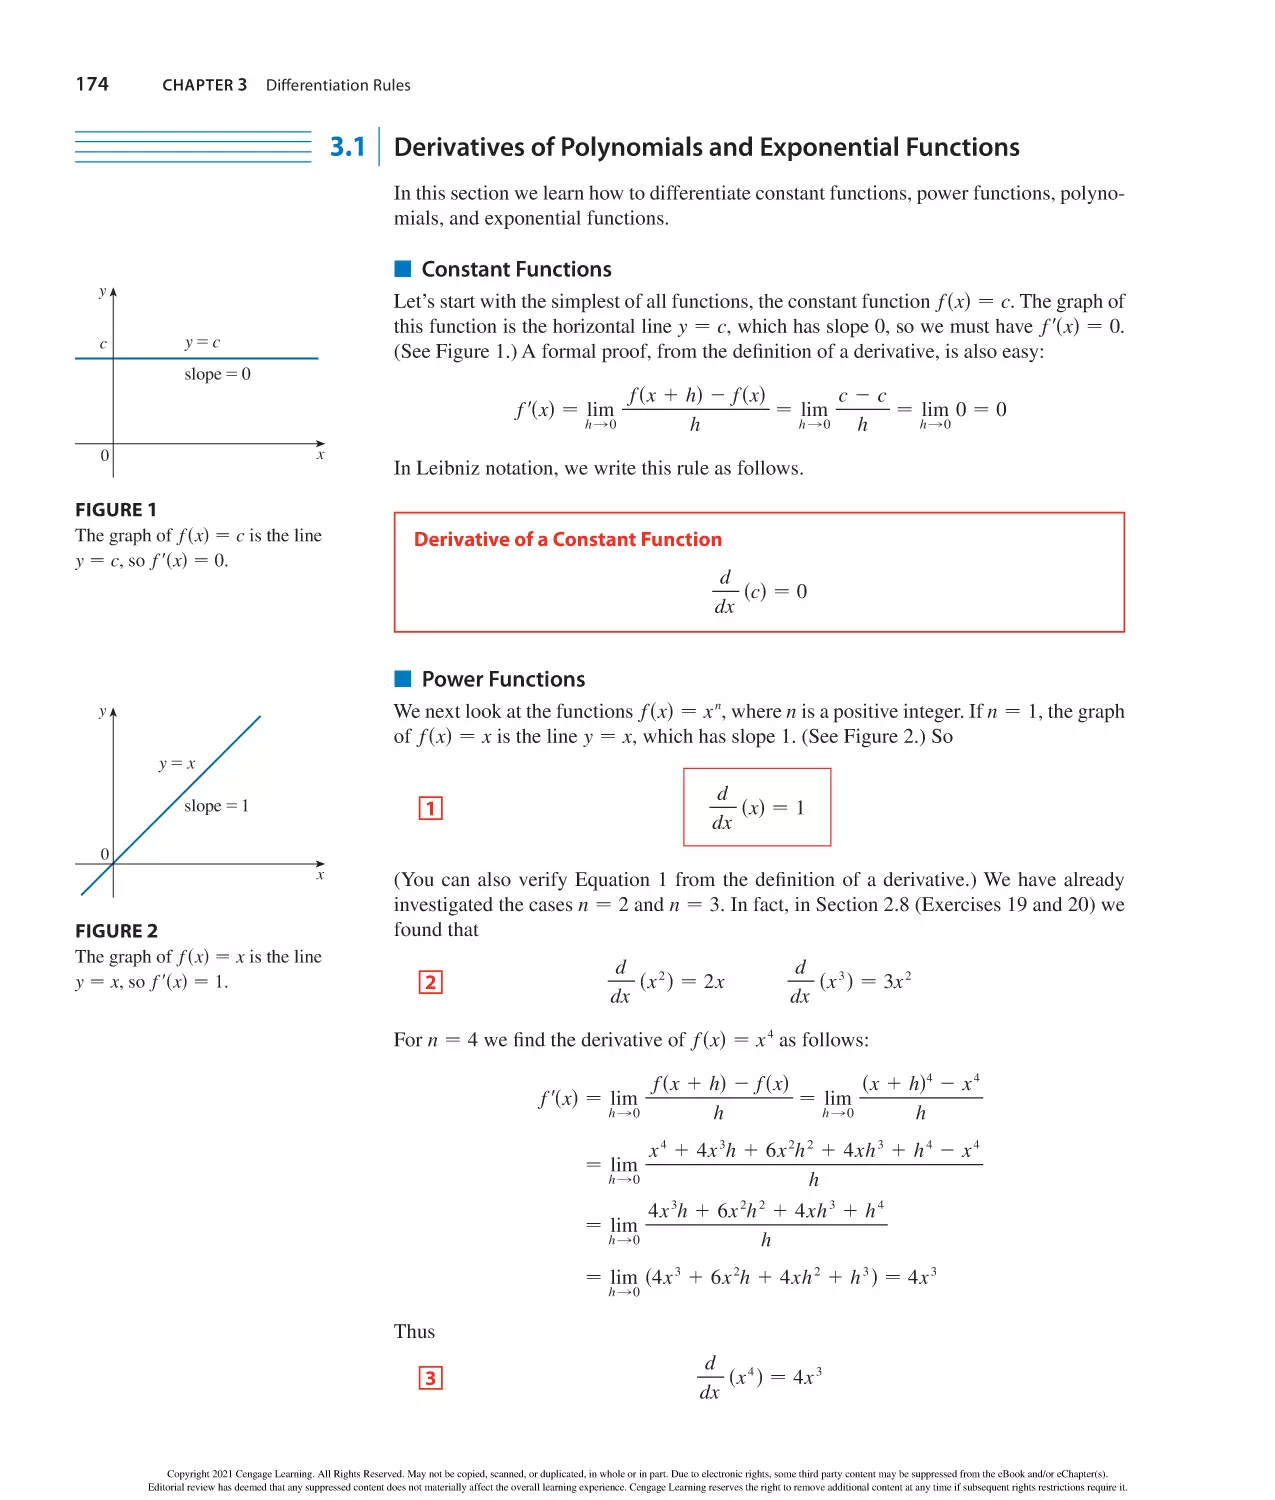 3.1 Derivatives of Polynomials and Exponential Functions